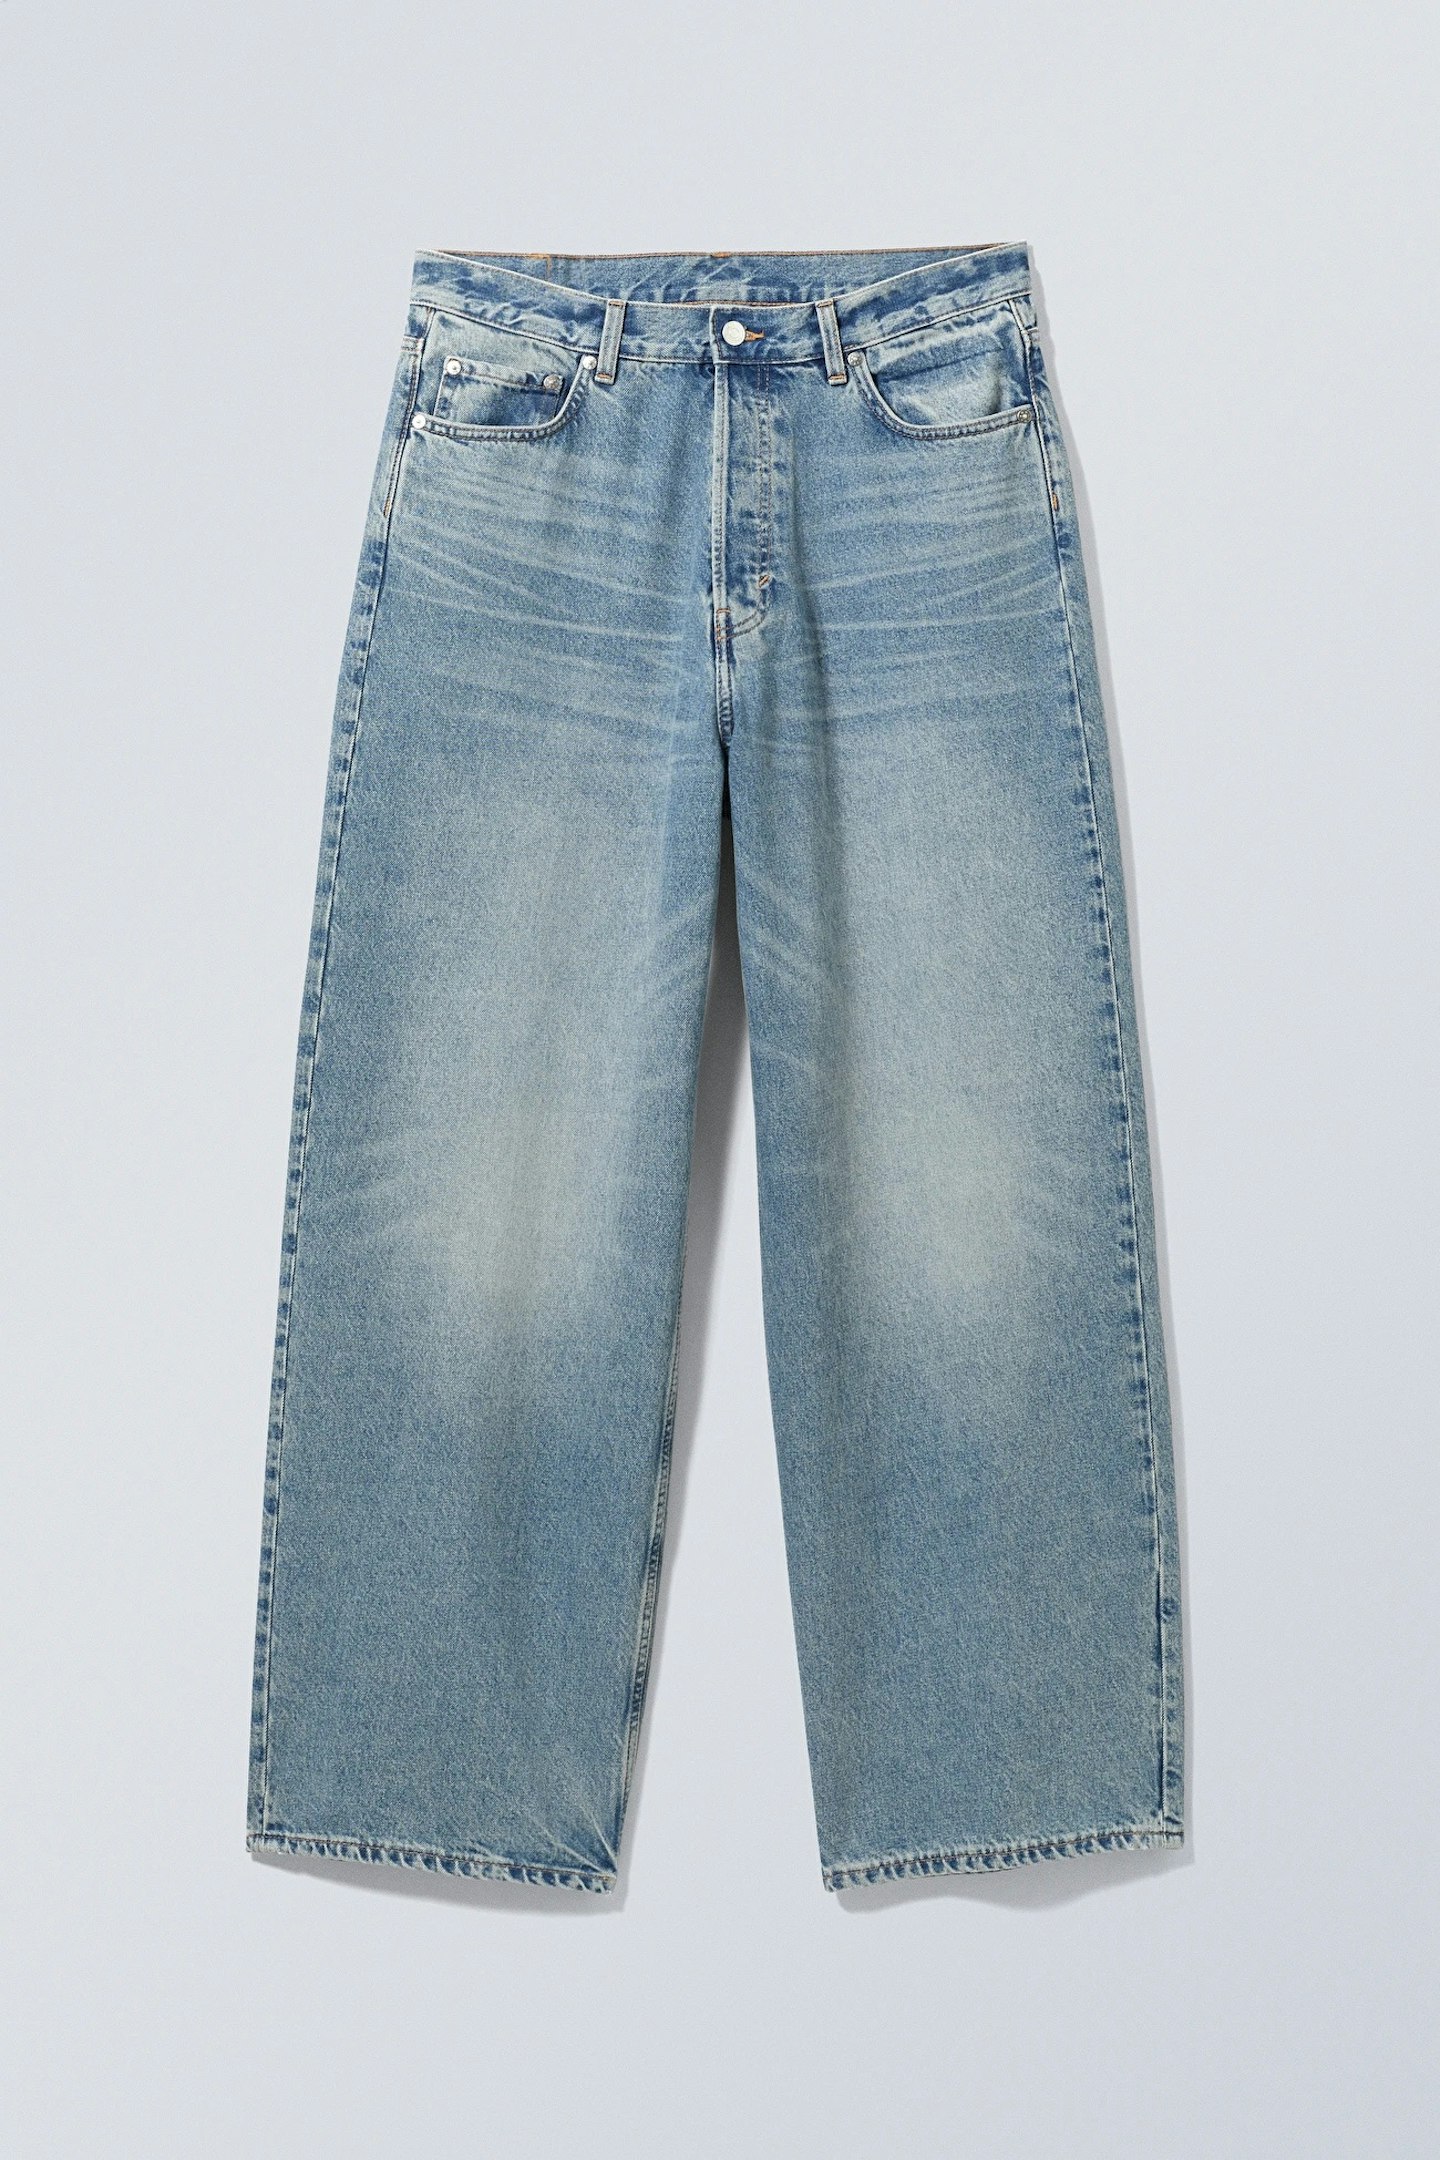 Weekday, Astra Loose Baggy Jeans